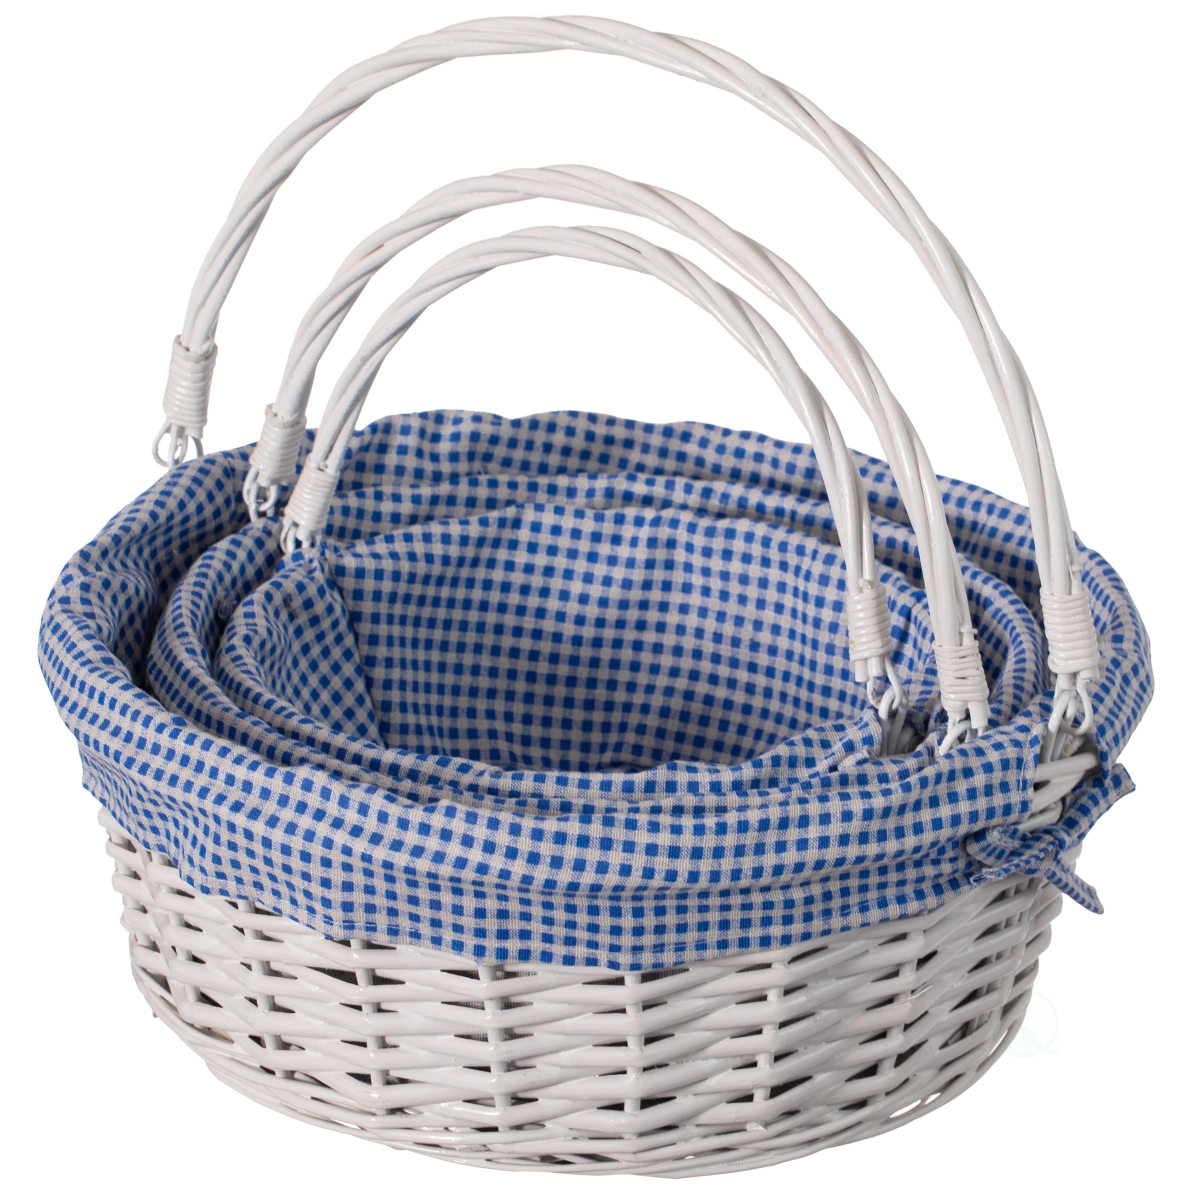 Picture of Wickerwise QI004620.BL.3 Traditional White Round Willow Gift Basket with Blue and White Gingham Liner and Sturdy Foldable Handles, Food Snacks Storage Basket, Set of 3